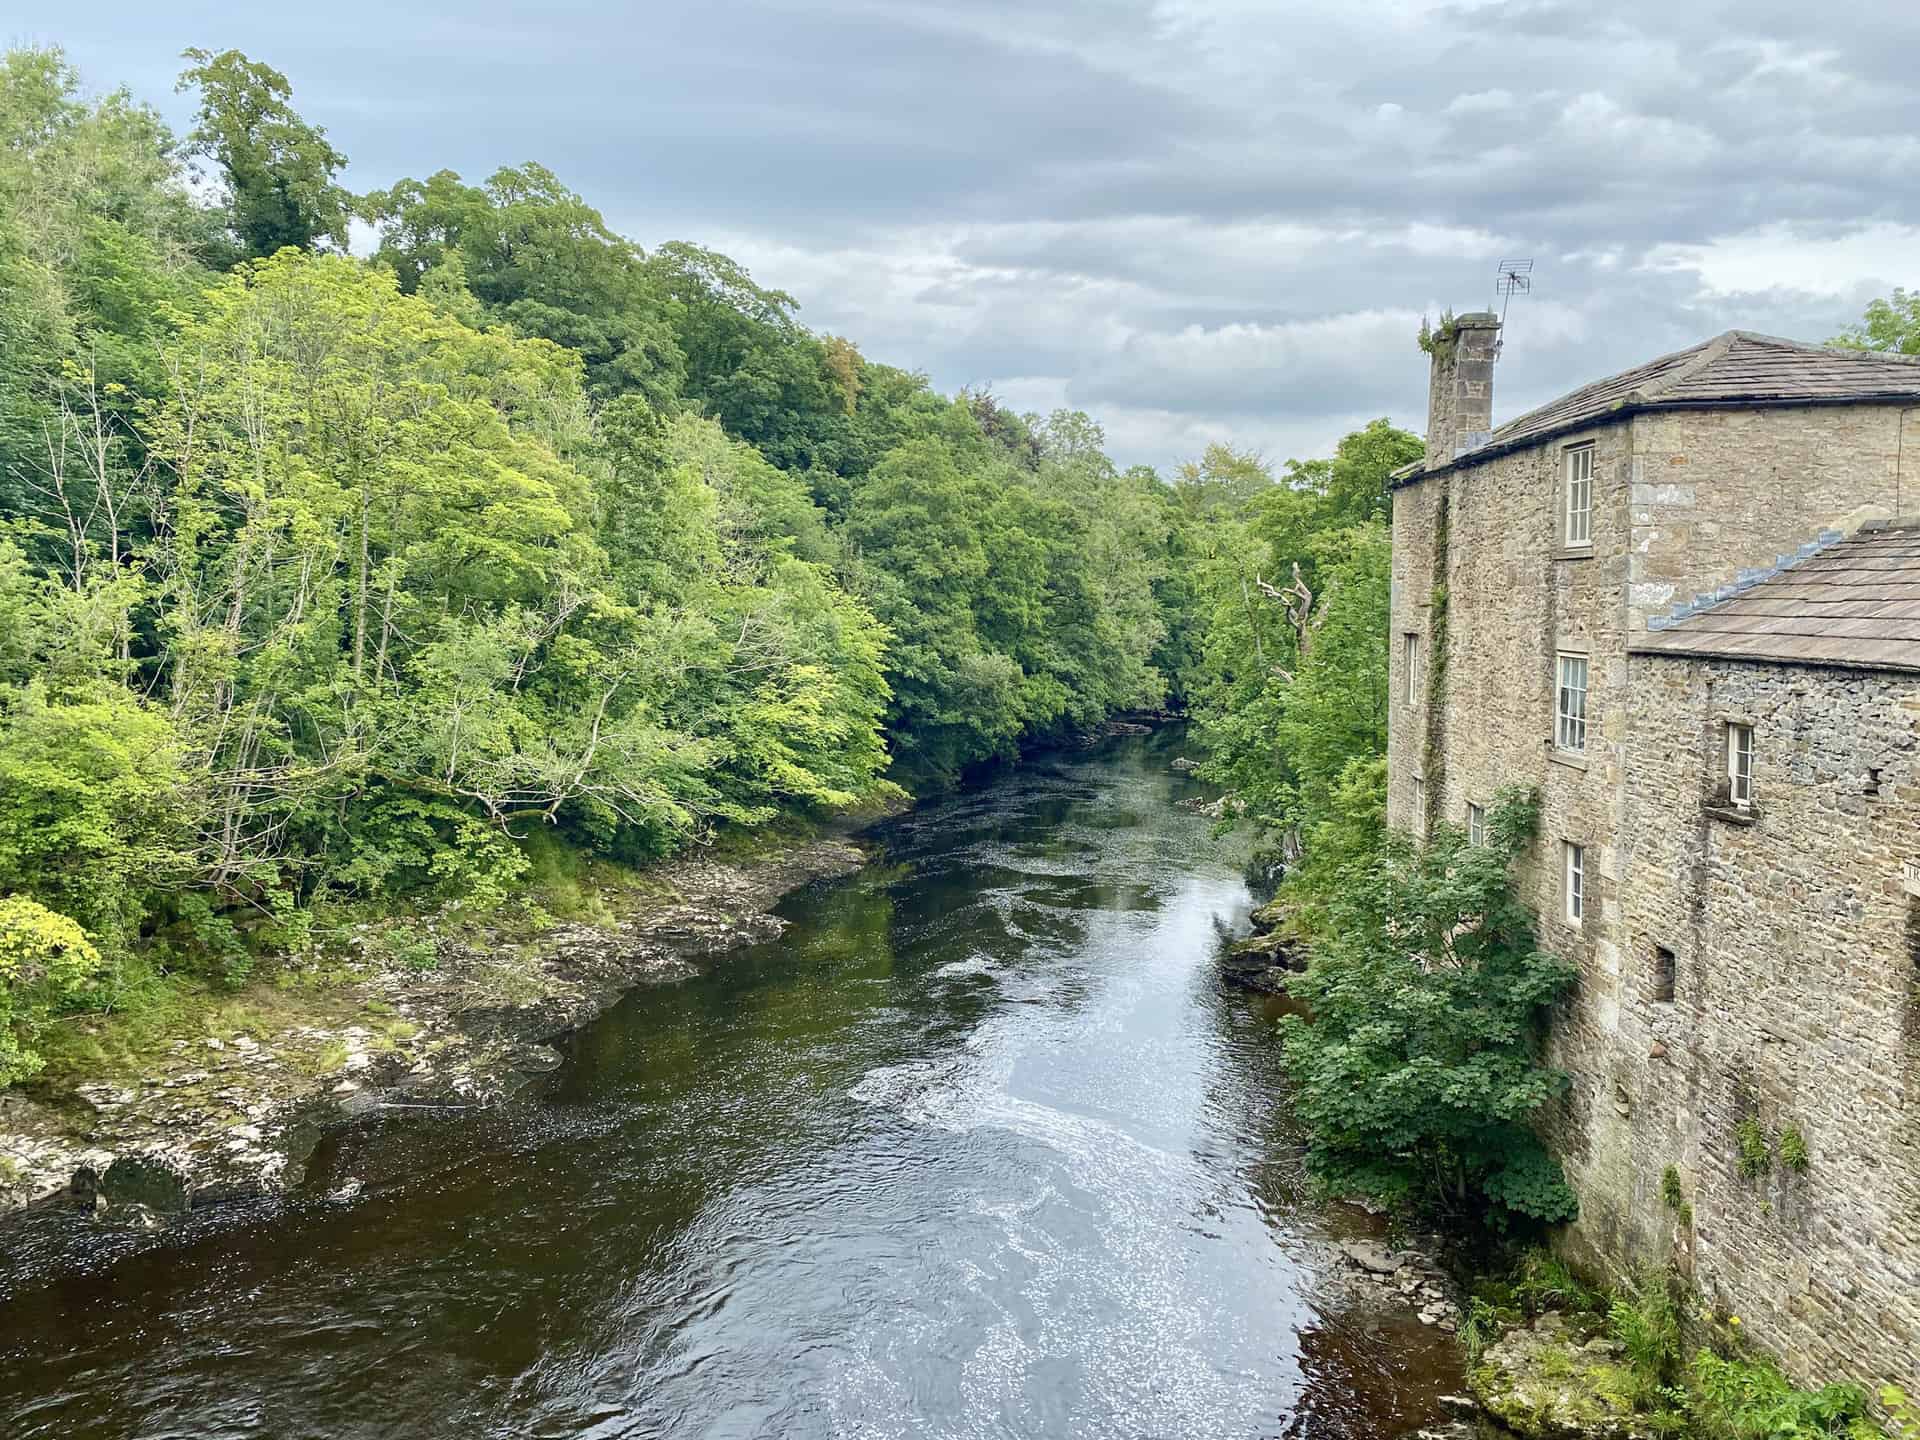 Yore Mill by the side of the River Ure at Aysgarth Falls. From number 20 in my list of the best walks in the Yorkshire Dales.